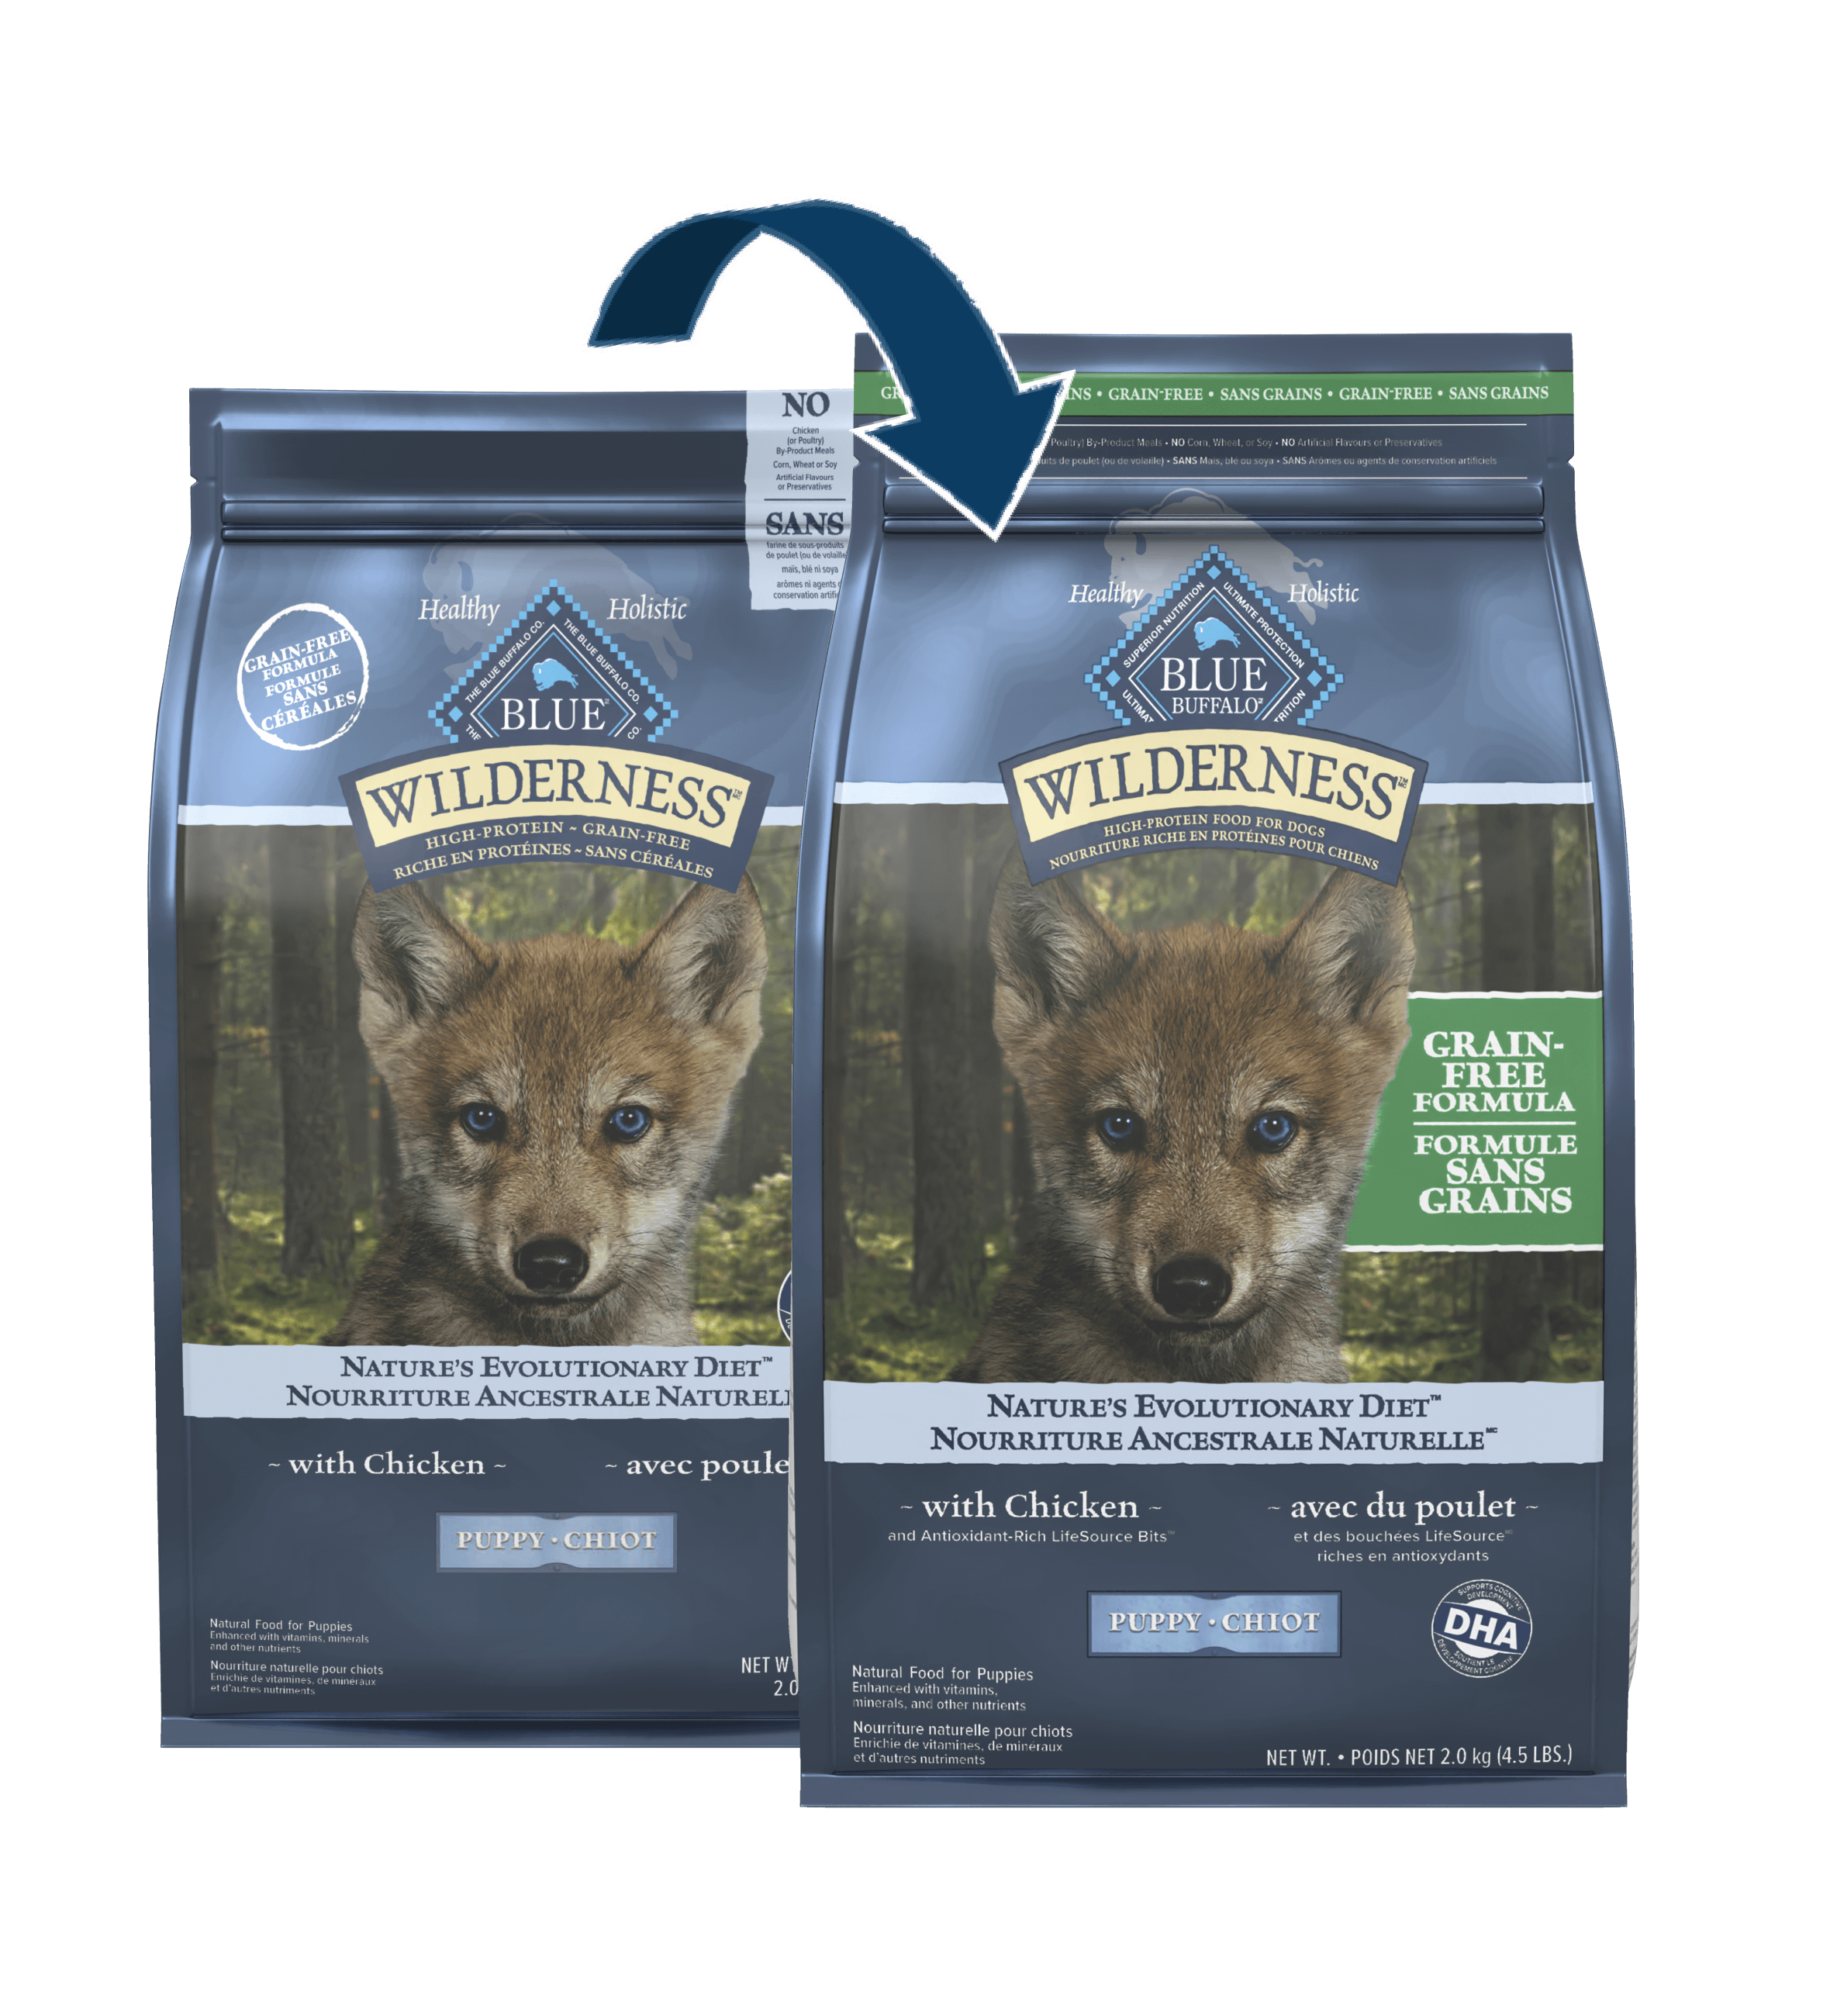 Displaying Two bags of Blue Buffalo Wilderness Puppy Chicken Formula dog food with a wolf puppy image; grain-free and high-protein claims, transitioning from standard to updated packaging.